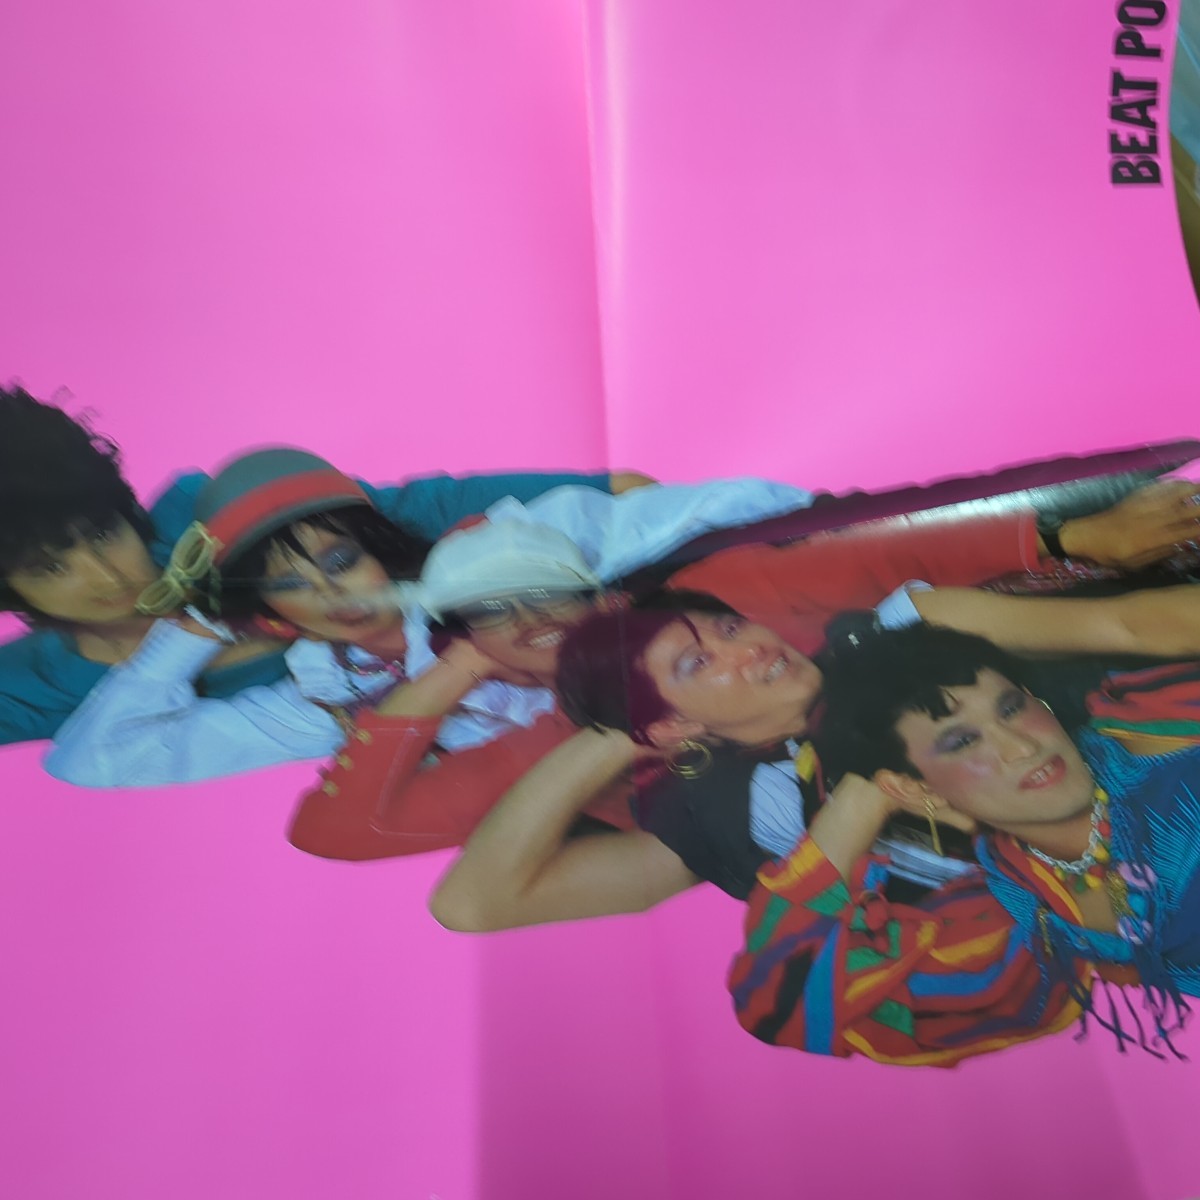 RCsakseshon beet pops record special jacket poster attaching 